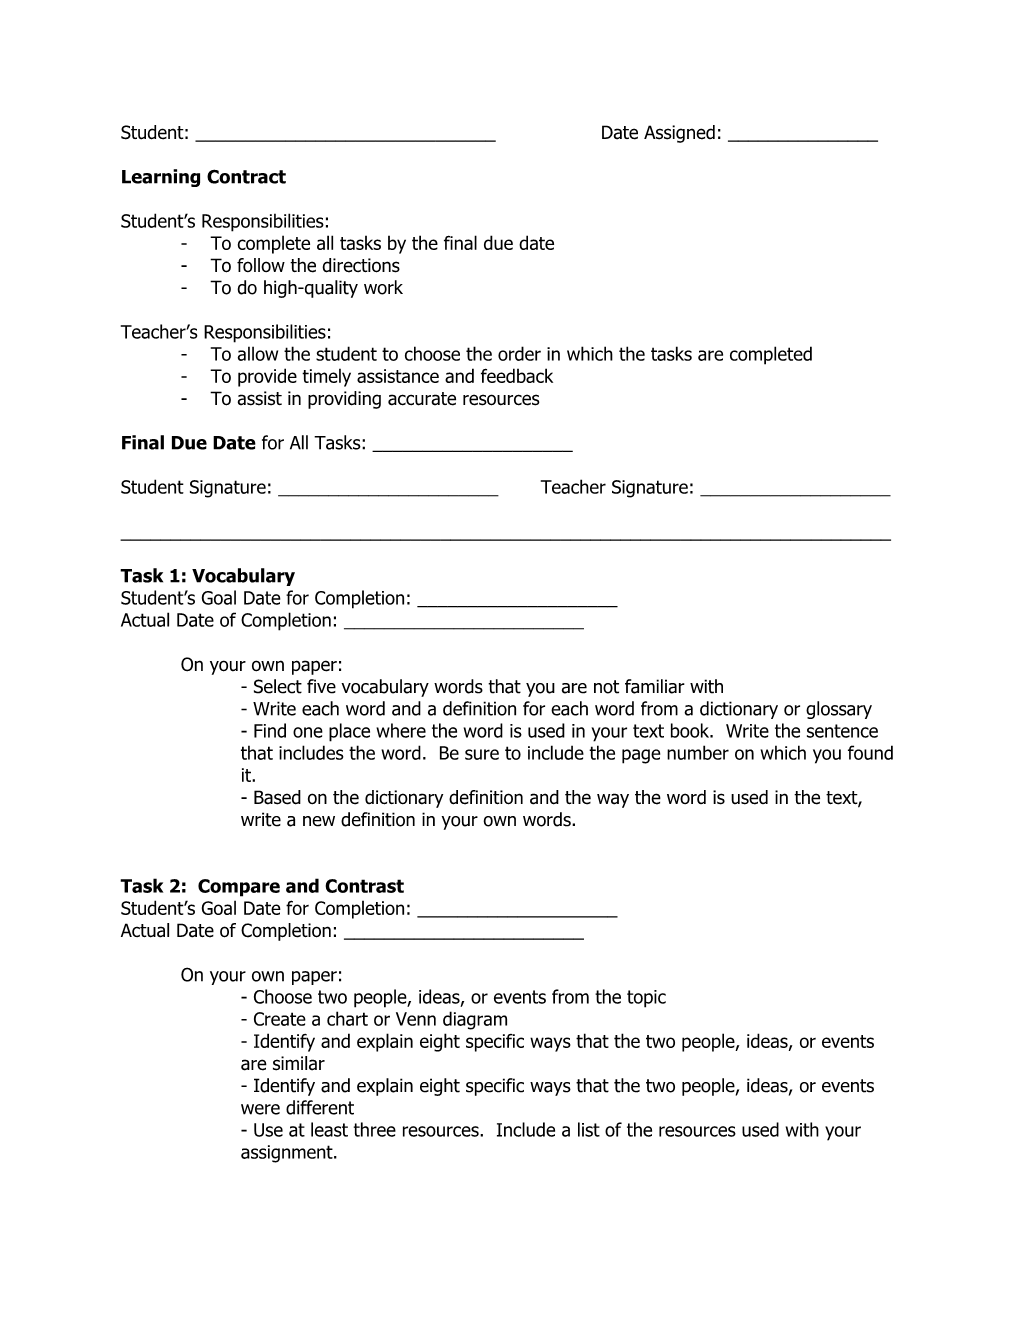 General Learning Contract